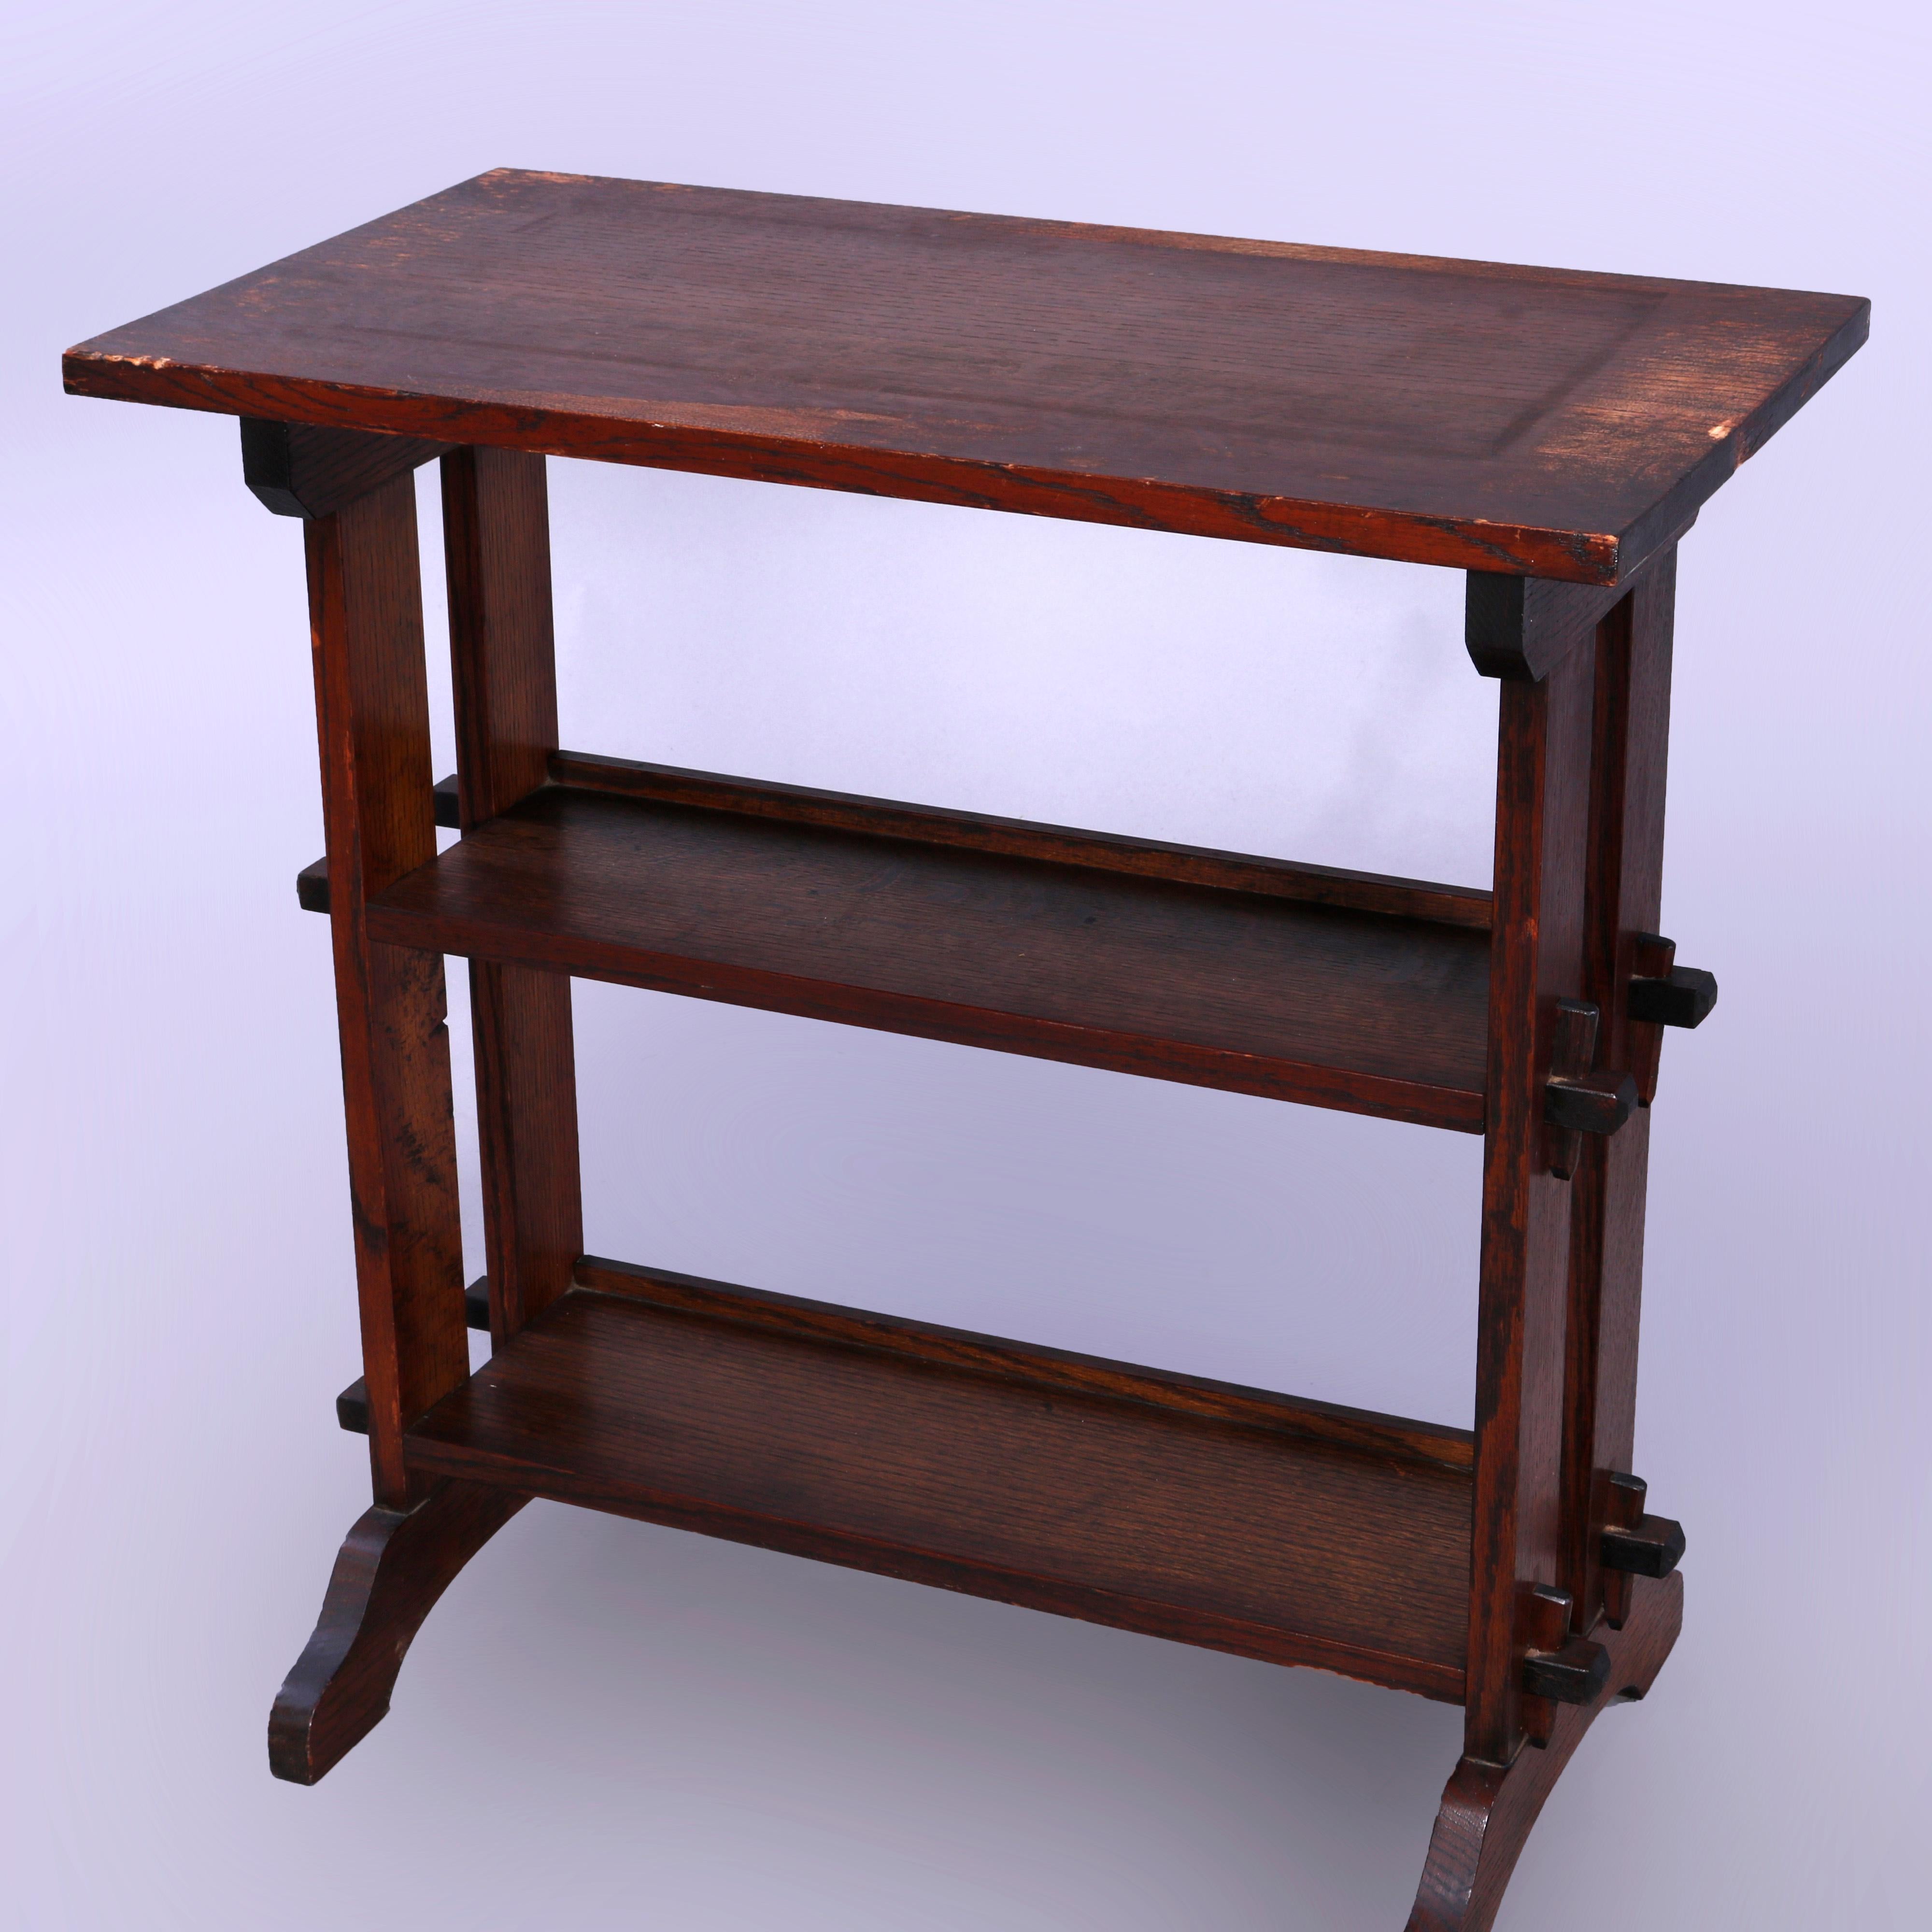 An antique Arts and Crafts Journey book stand by Roycroft offers oak mortise and tenon construction in trestle form with top shelf surmounting two lower book trays flanked by slat sides land raised on arced legs, maker label on base as photographed,